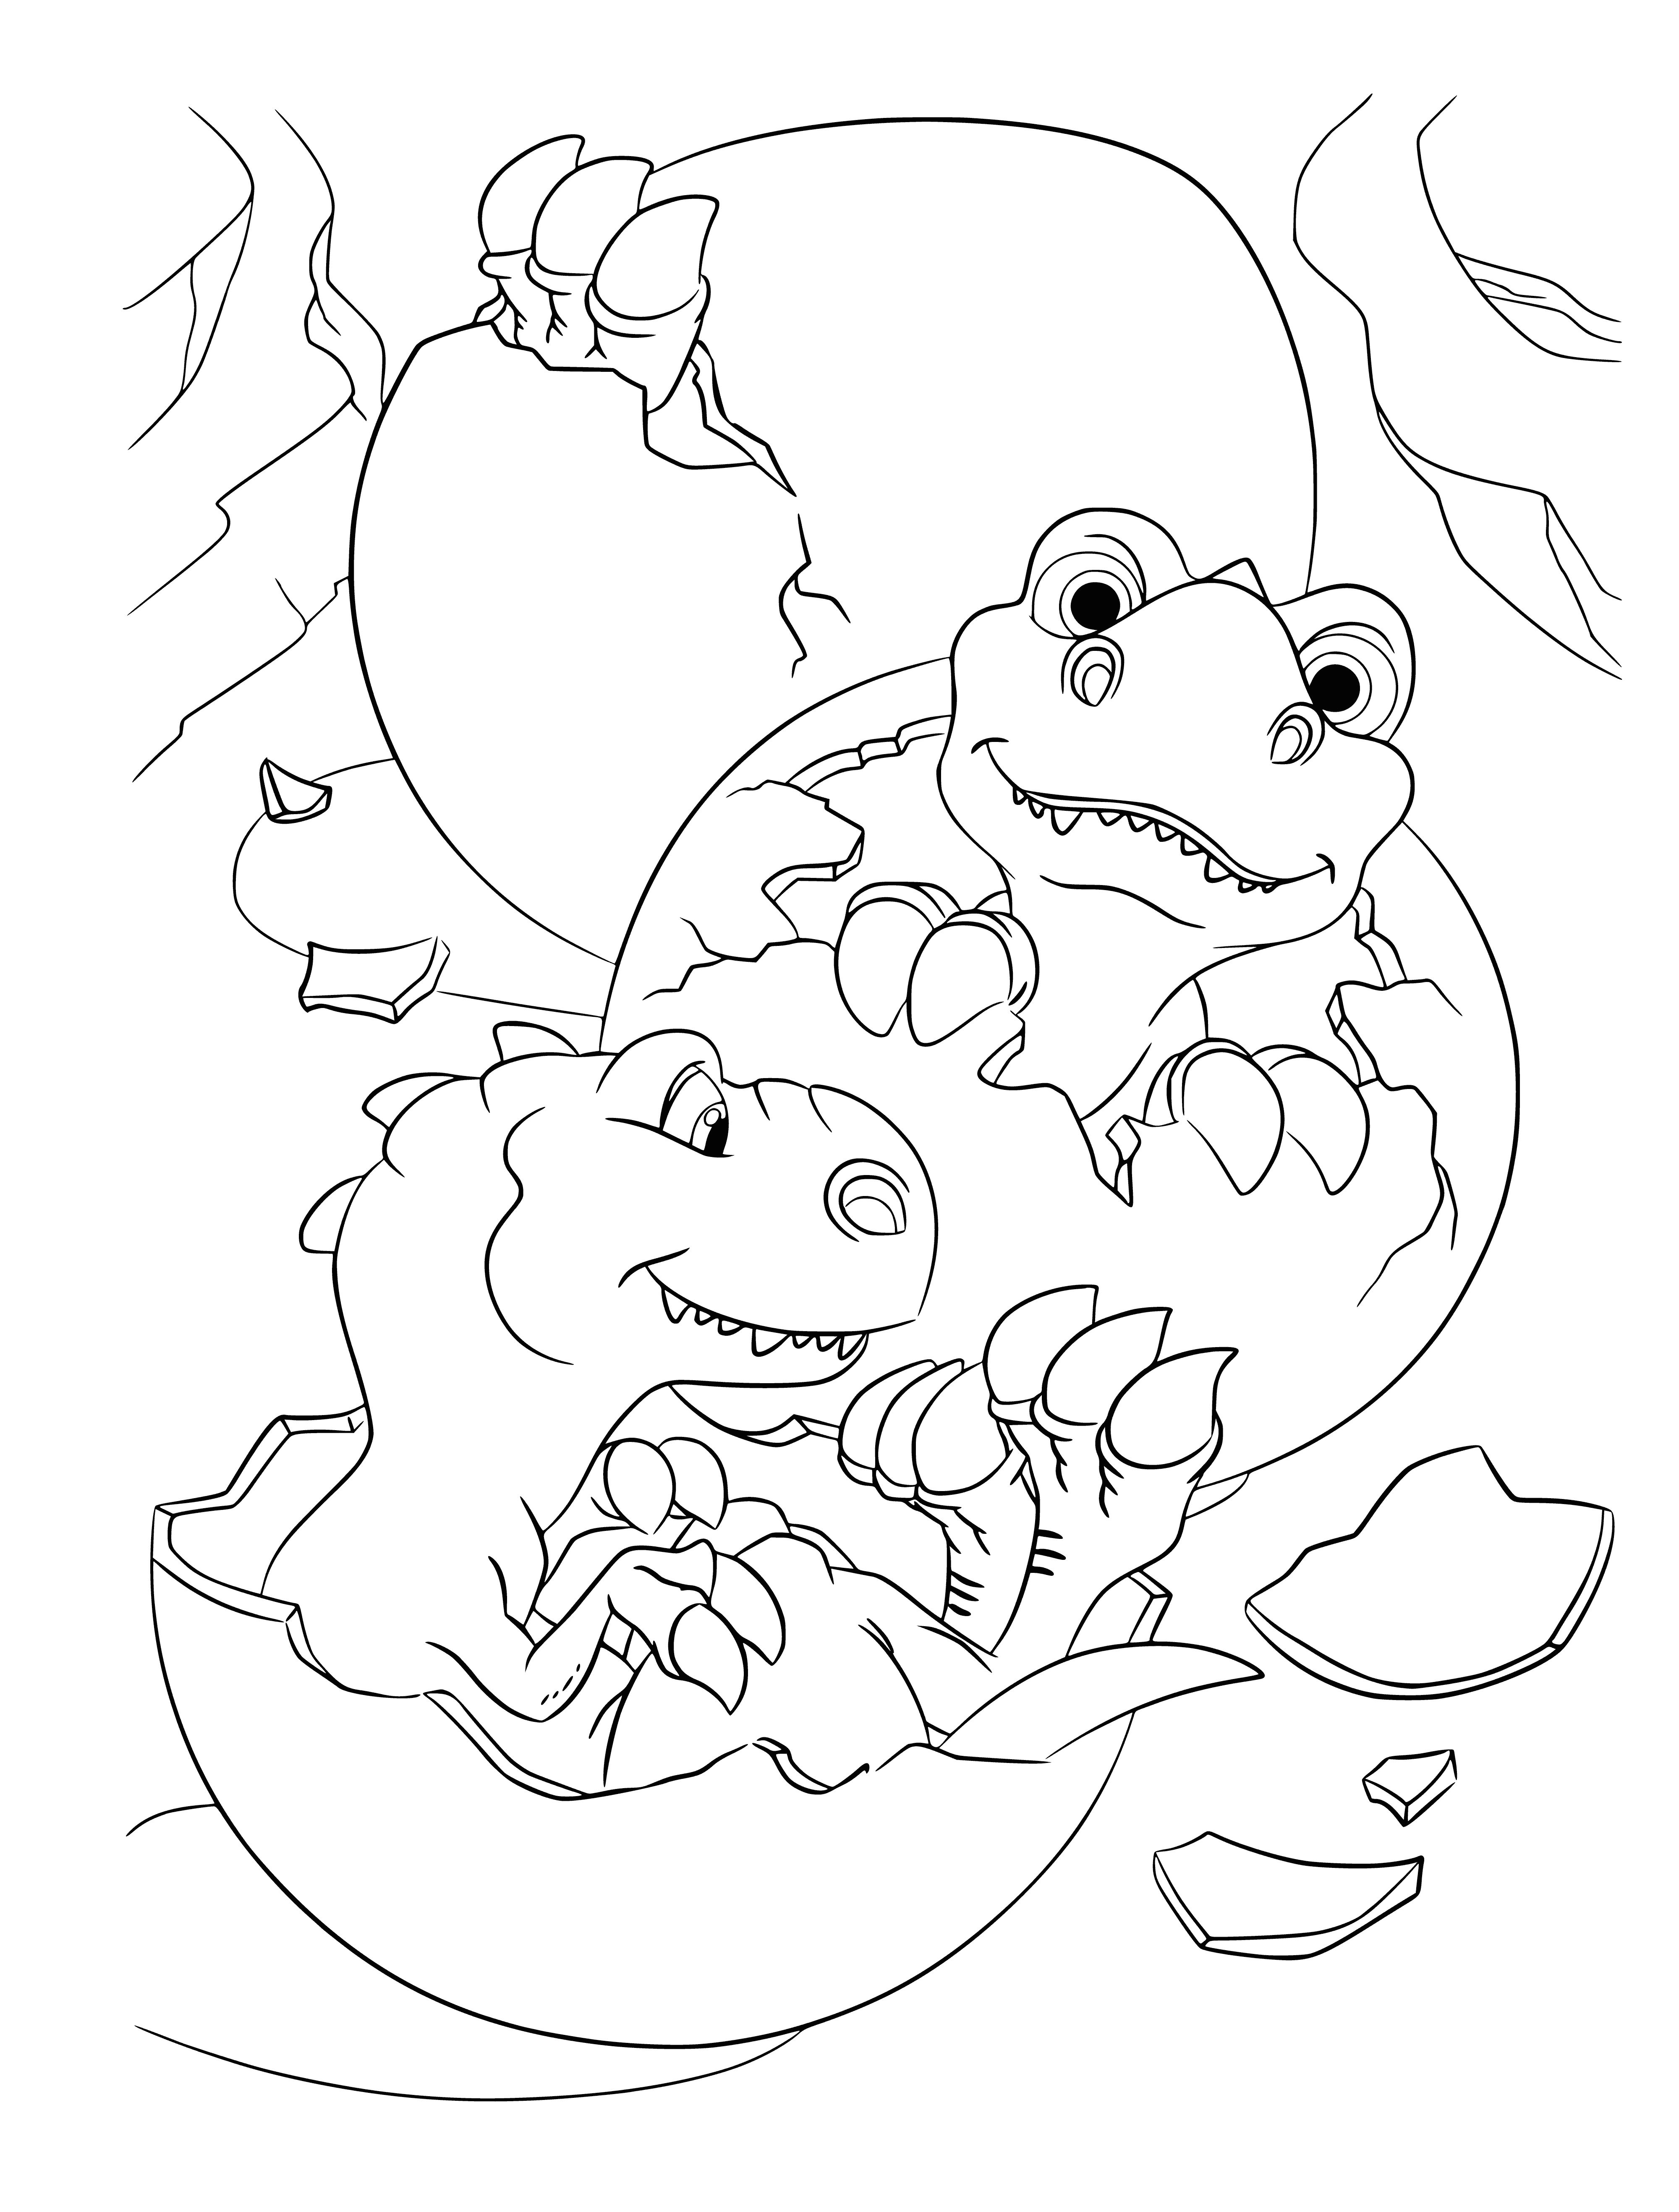 Dinosaurs hatch coloring page